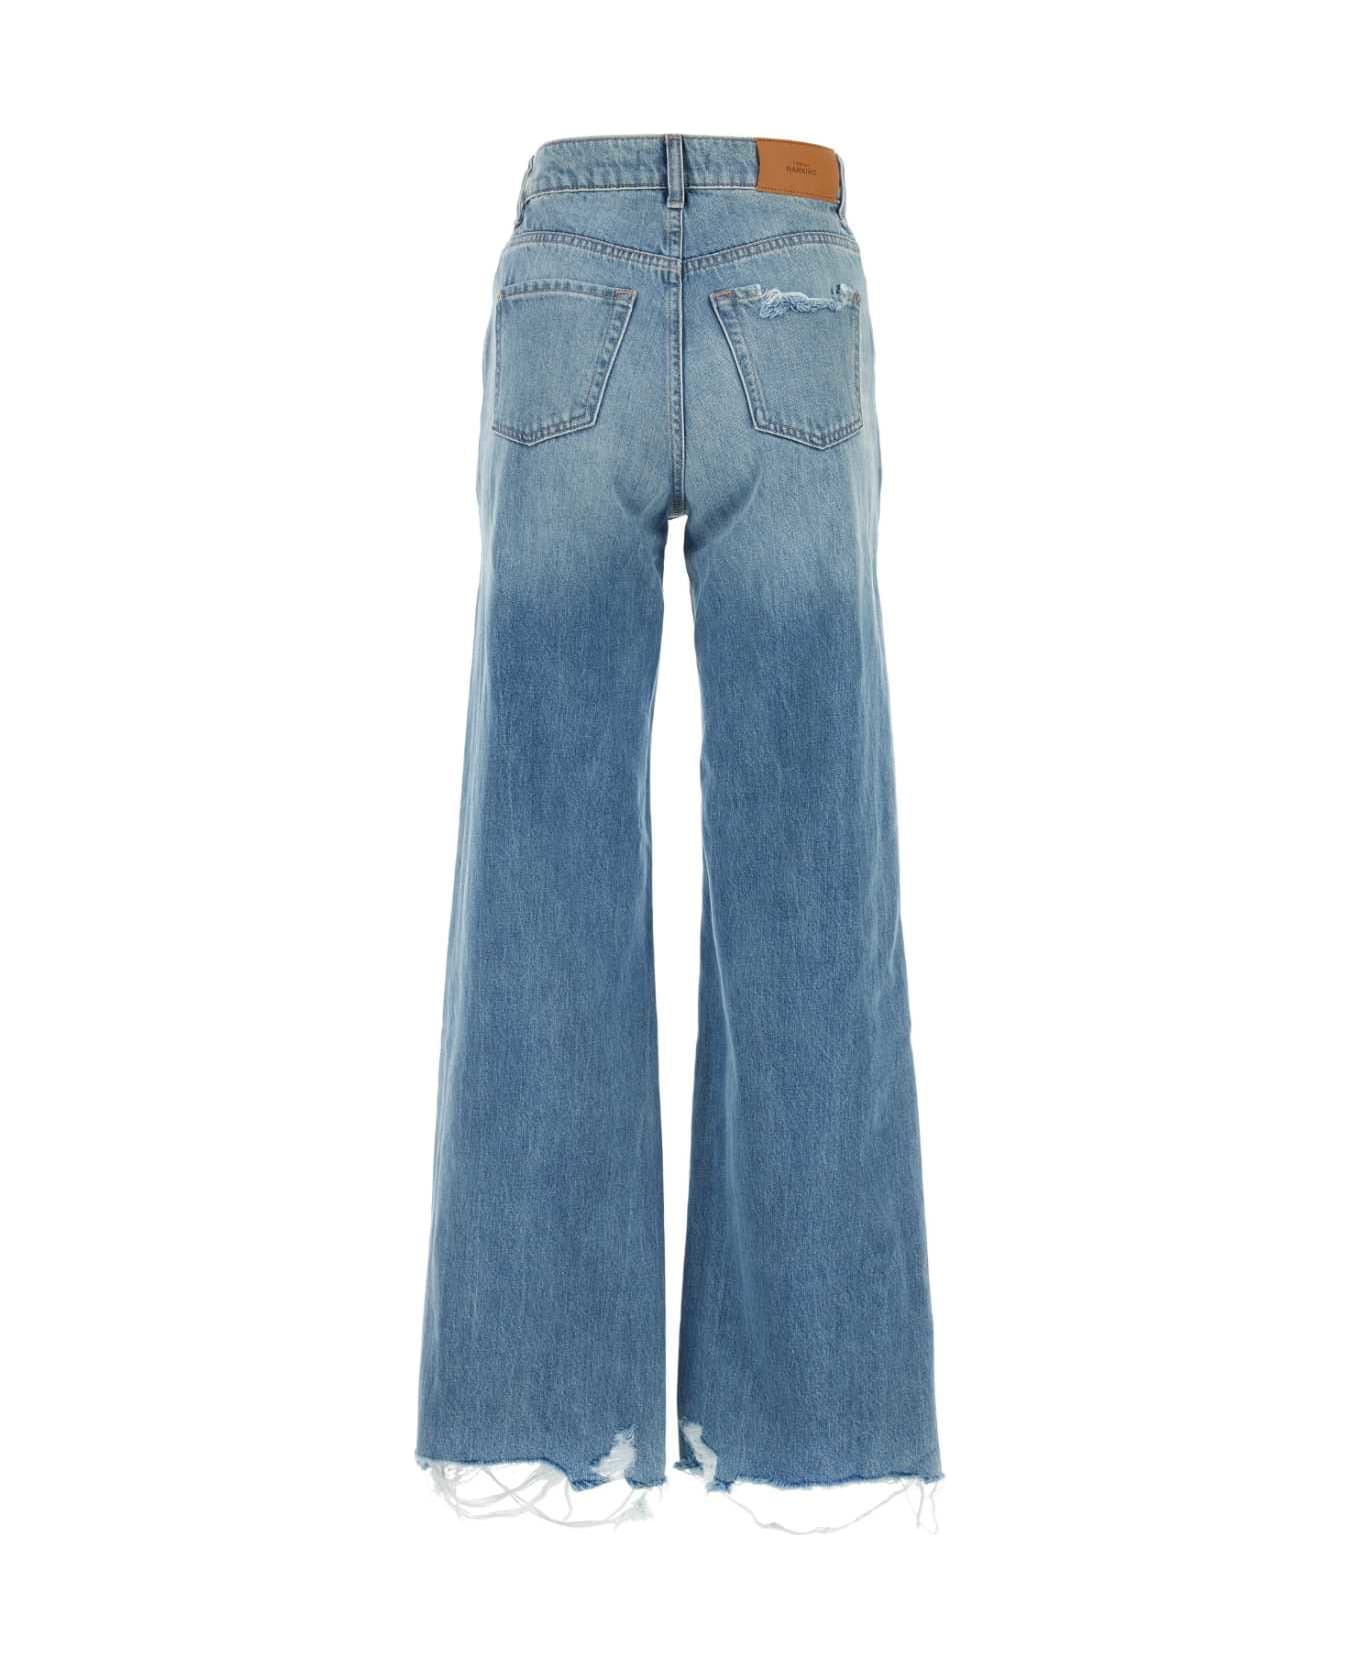 7 For All Mankind Denim Scout Wide-leg Jeans - Blue